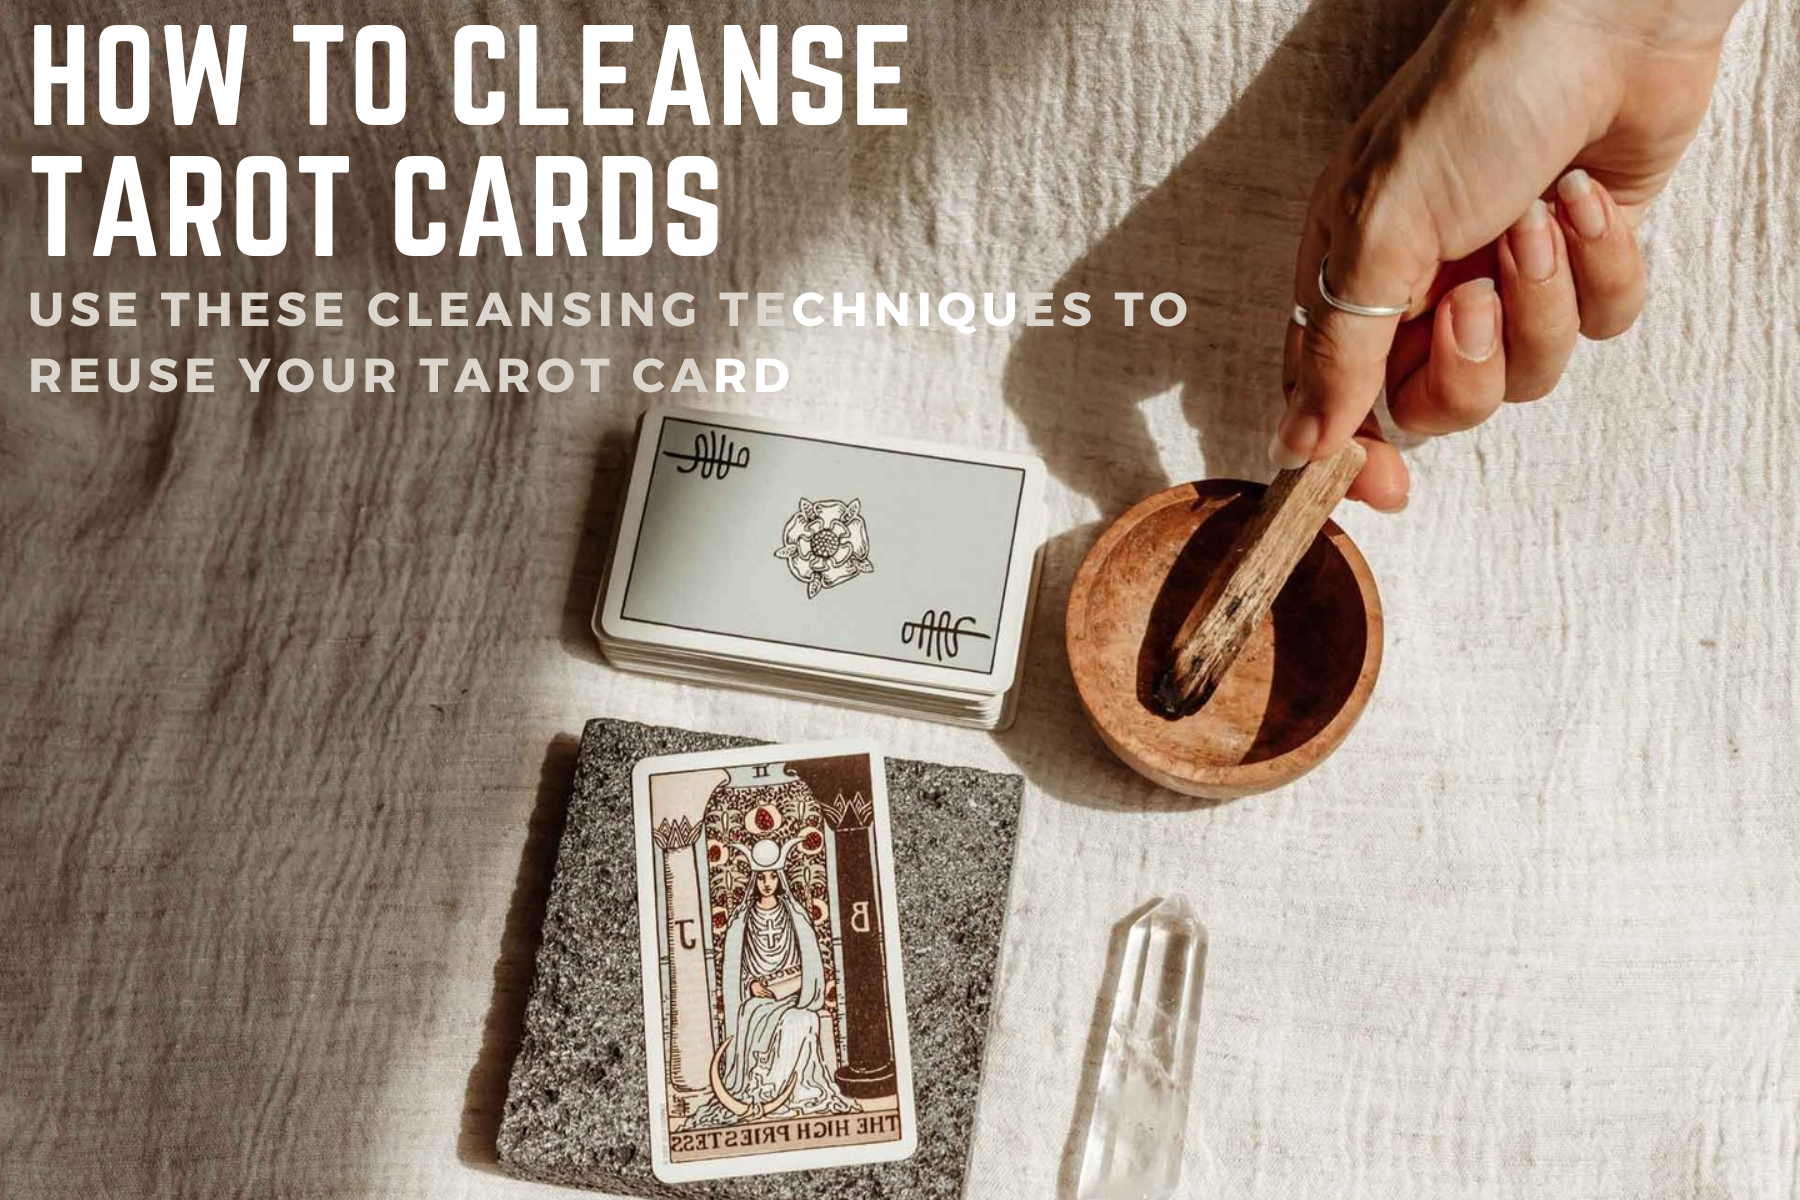 How To Cleanse Tarot Cards - Use These Cleansing Techniques To Reuse Your Tarot Card